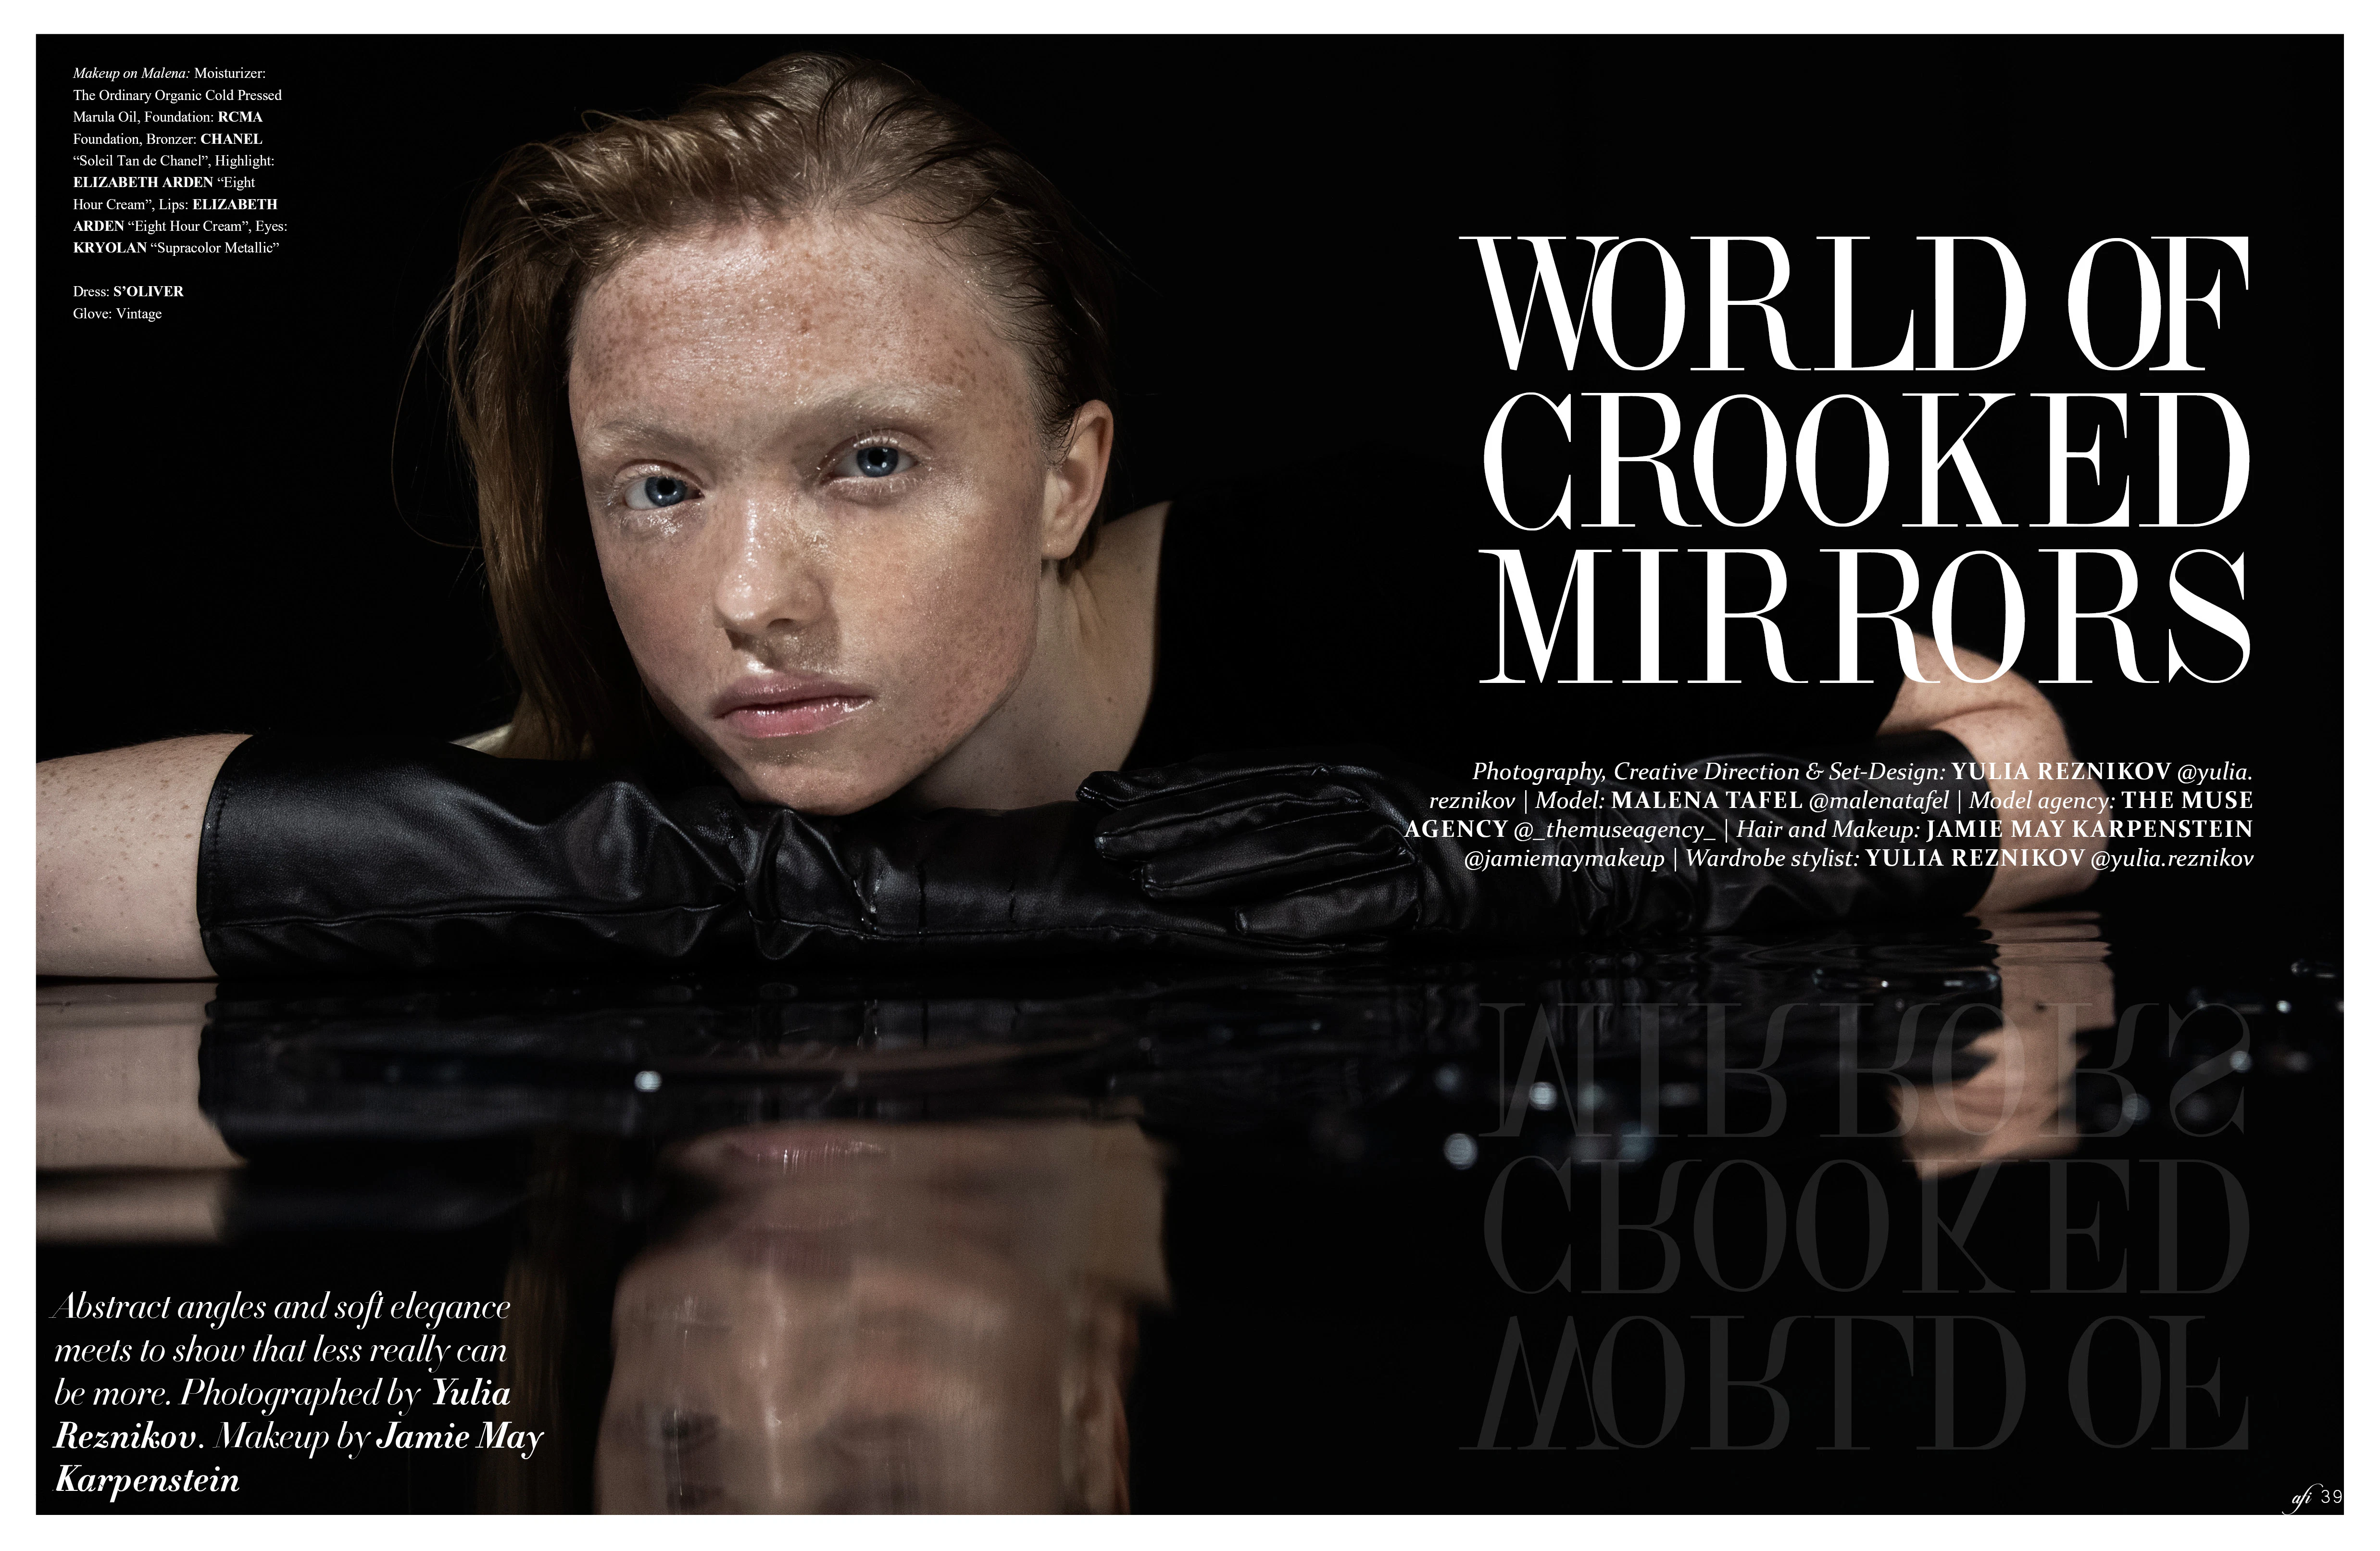 World of crooked mirrors BEAUTY EDITORIAL